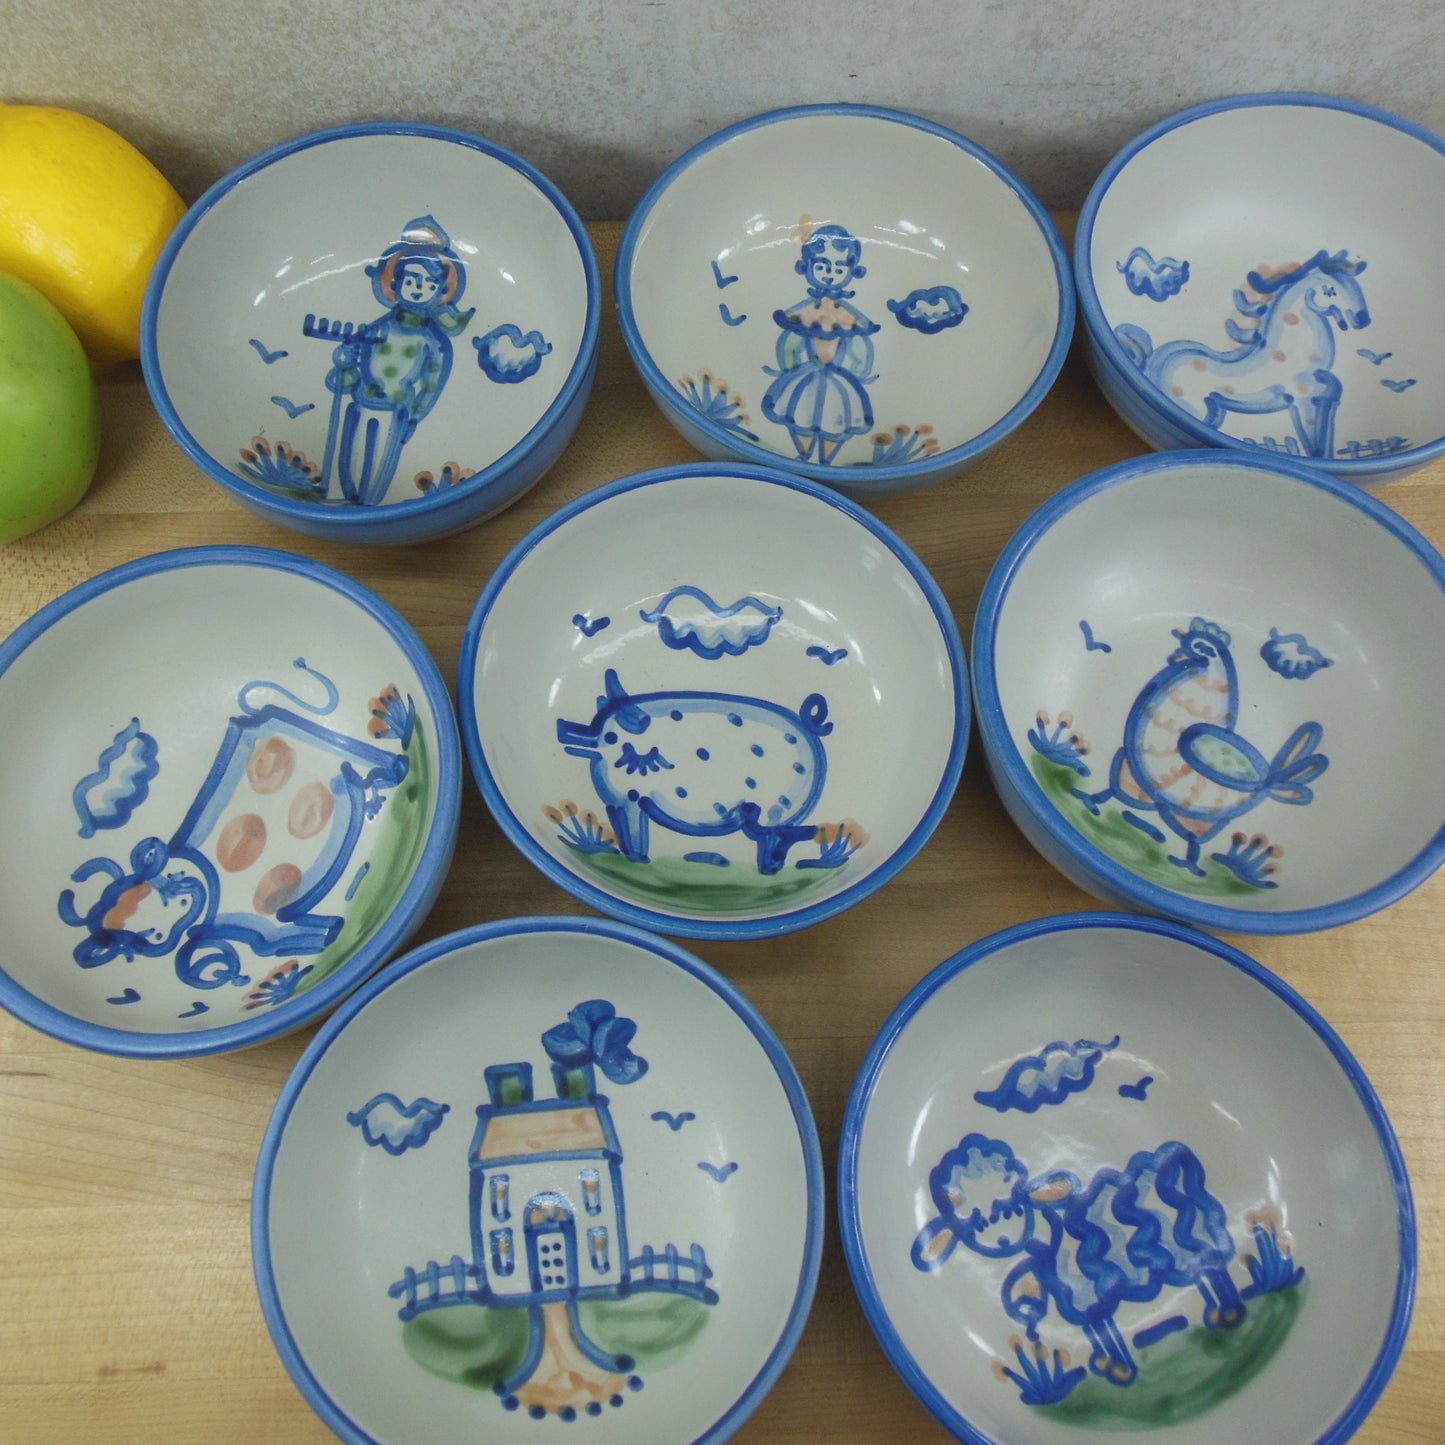 M.A. Hadley Pottery Cereal Bowls Country Farm Animals - 8 Set vintage